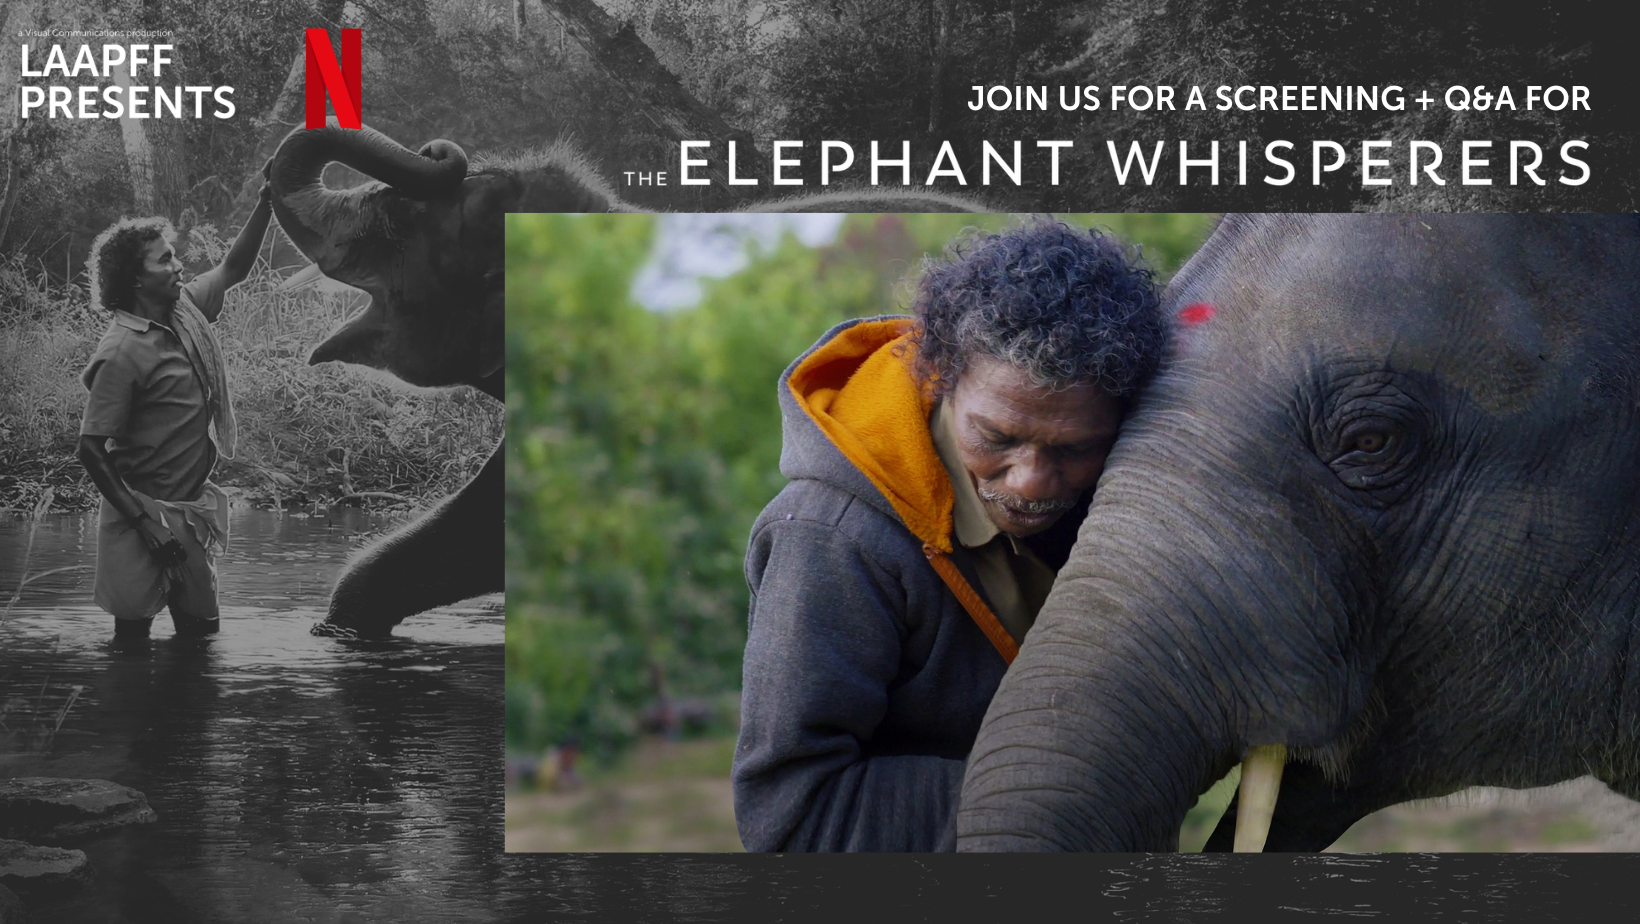 LAAPFF PRESENTS: THE ELEPHANT WHISPERERS